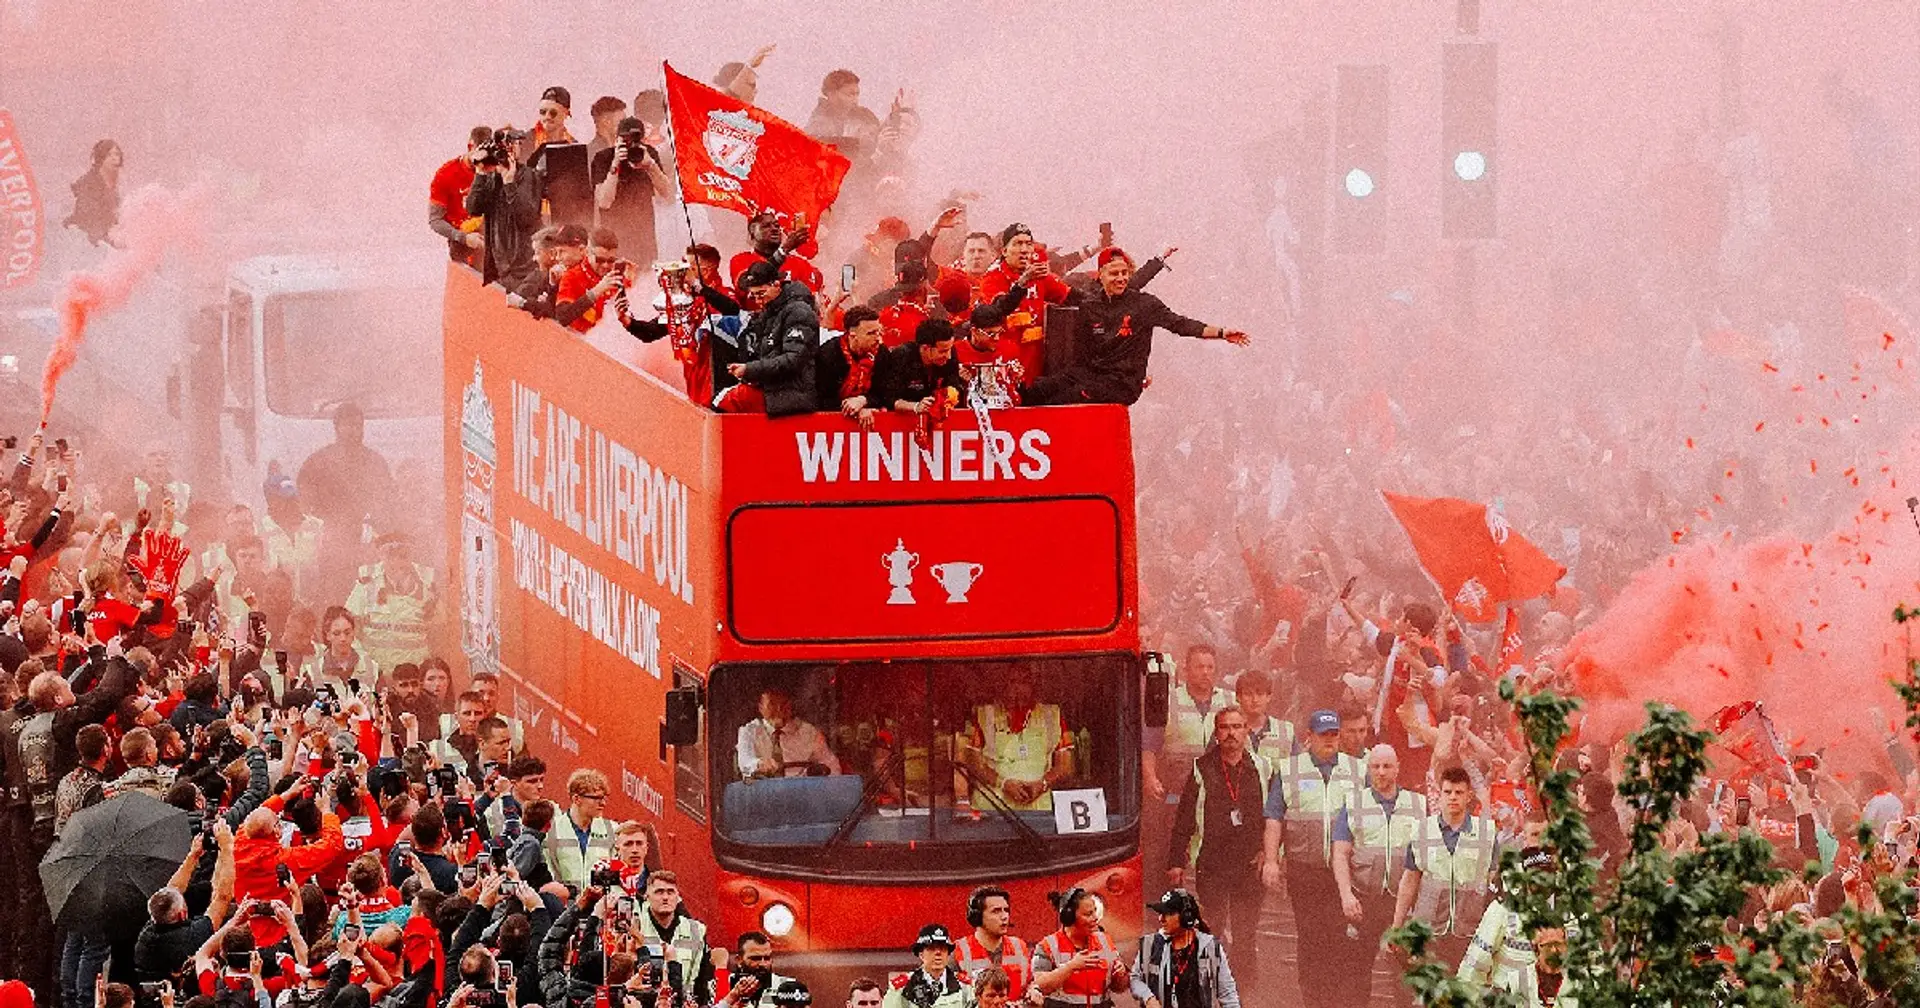 Liverpool will not hold end-of-season parade – reports